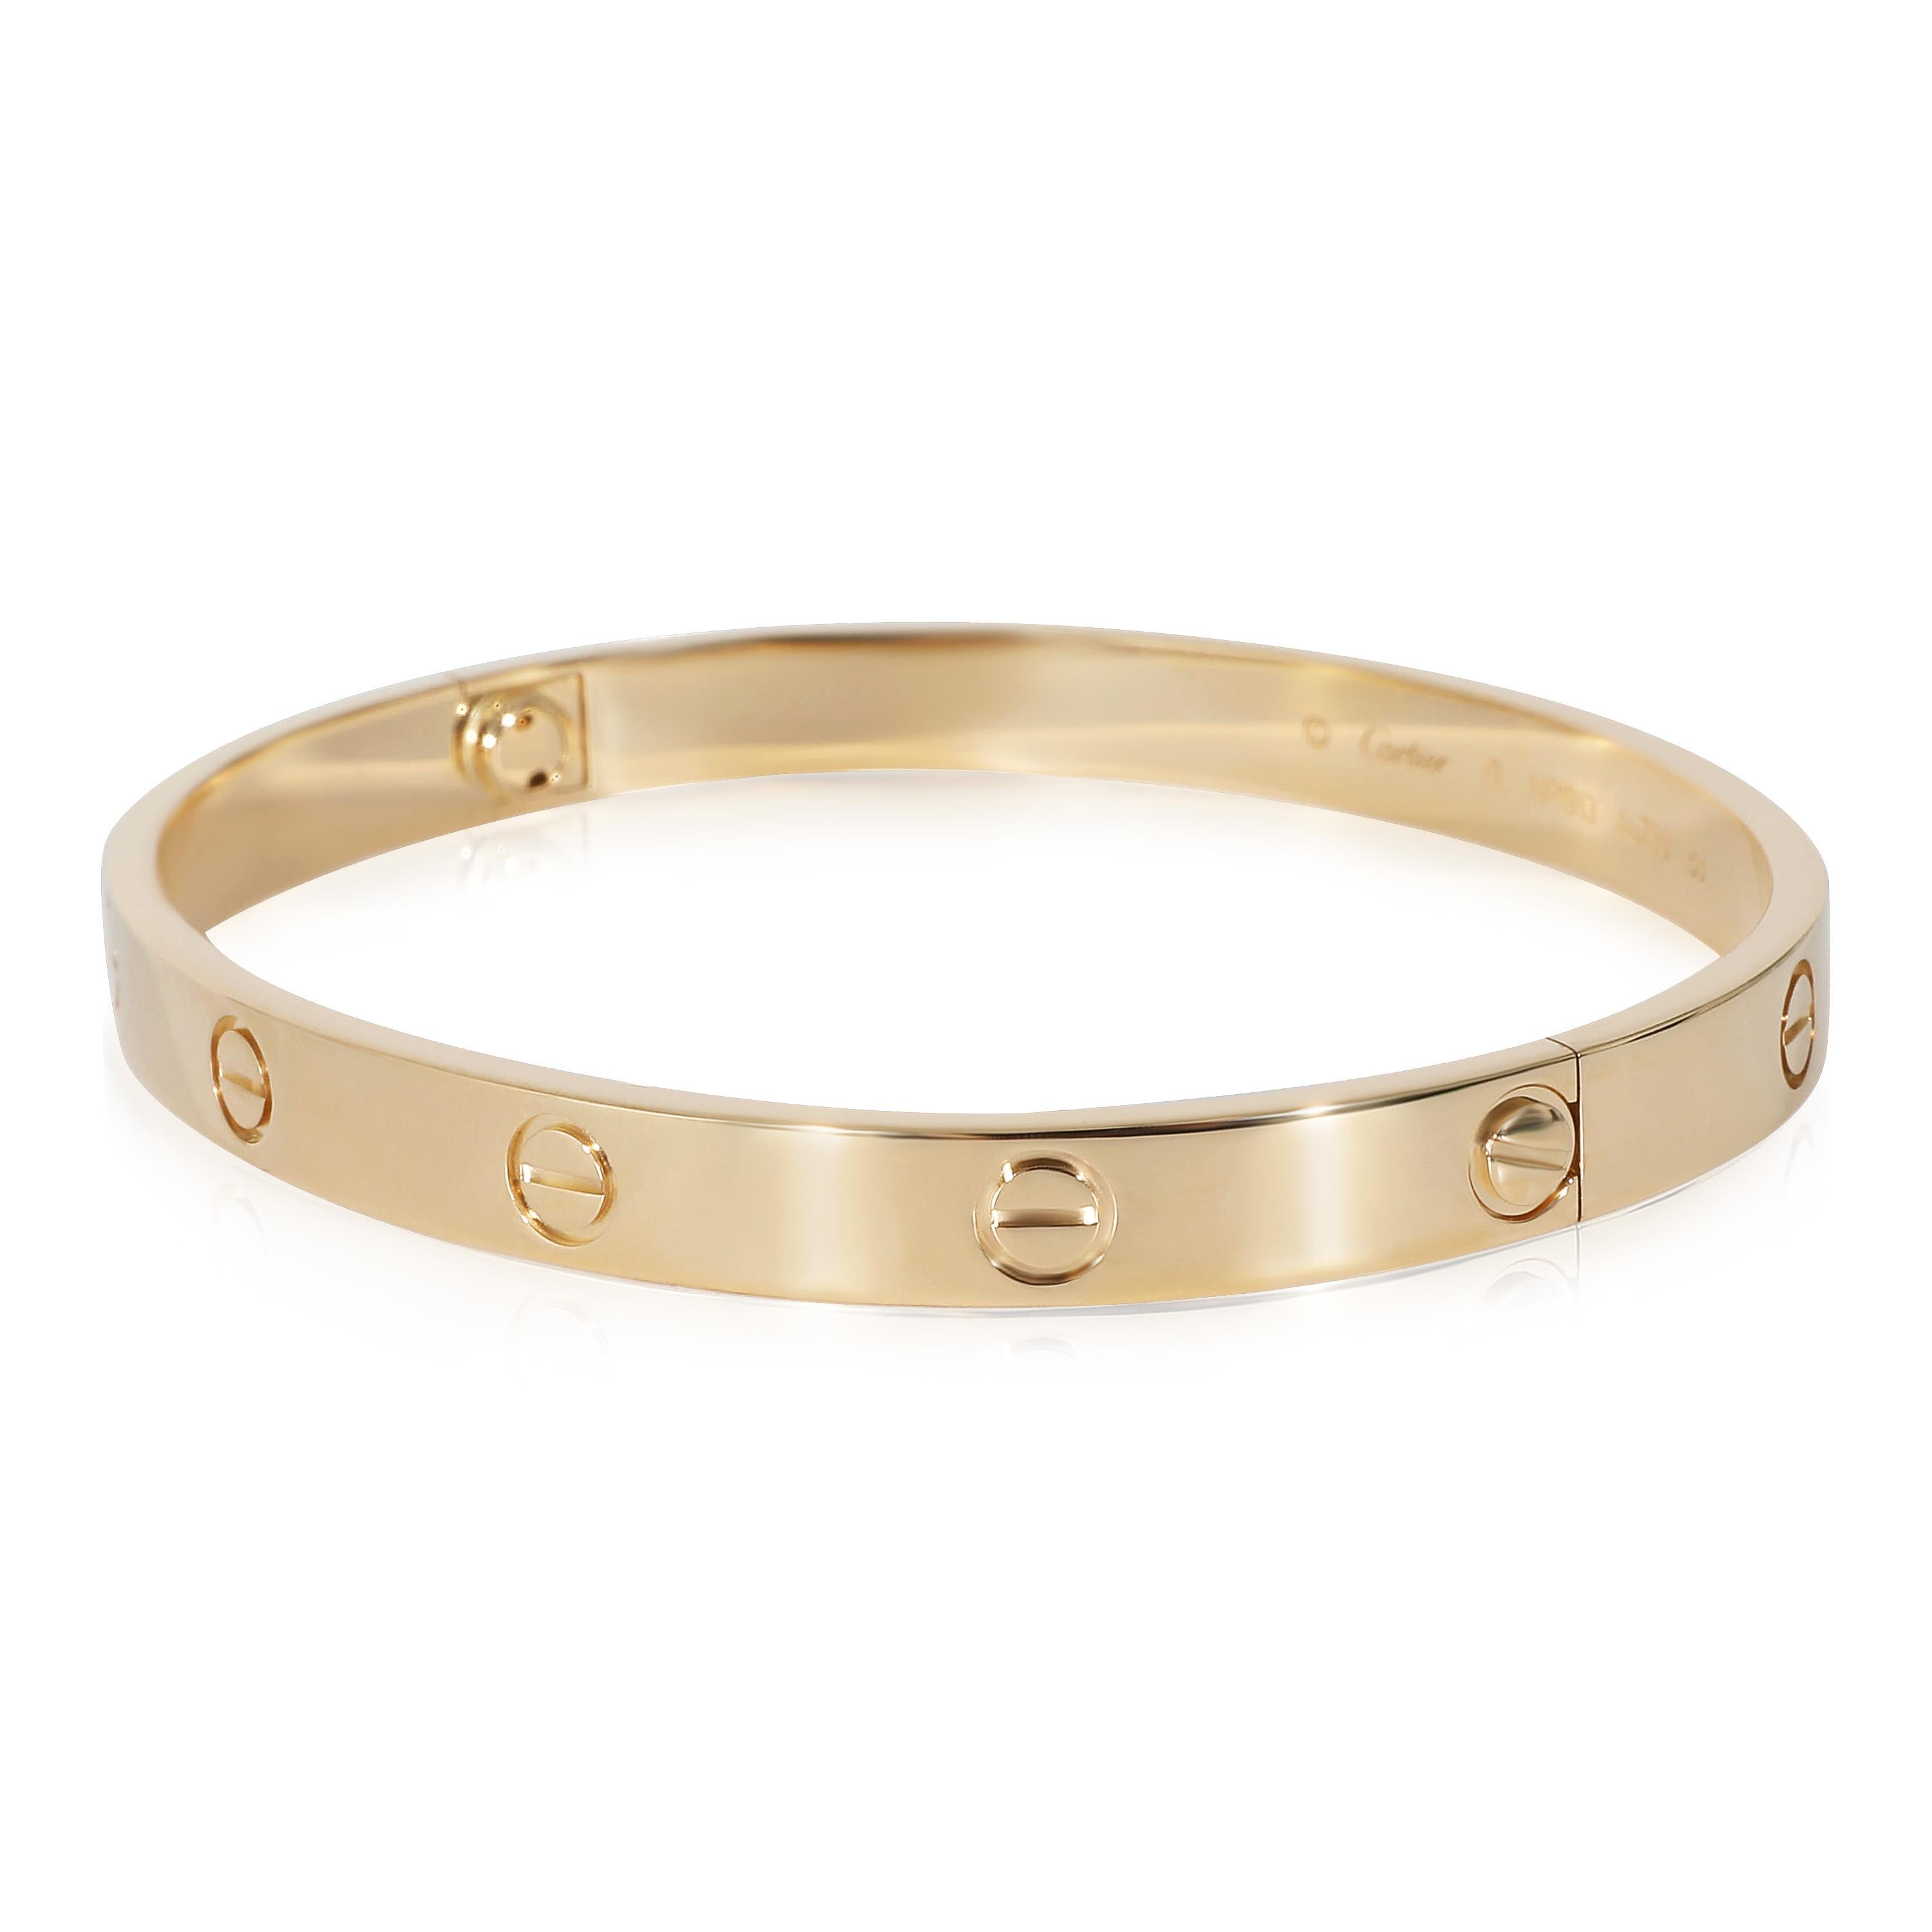 Cartier Love Bracelet In 18K Yellow Gold, Size 19

PRIMARY DETAILS
SKU: 132451
Listing Title: Cartier Love Bracelet In 18K Yellow Gold, Size 19
Condition Description: Cartier's Love collection is the epitome of iconic, from the recognizable designs